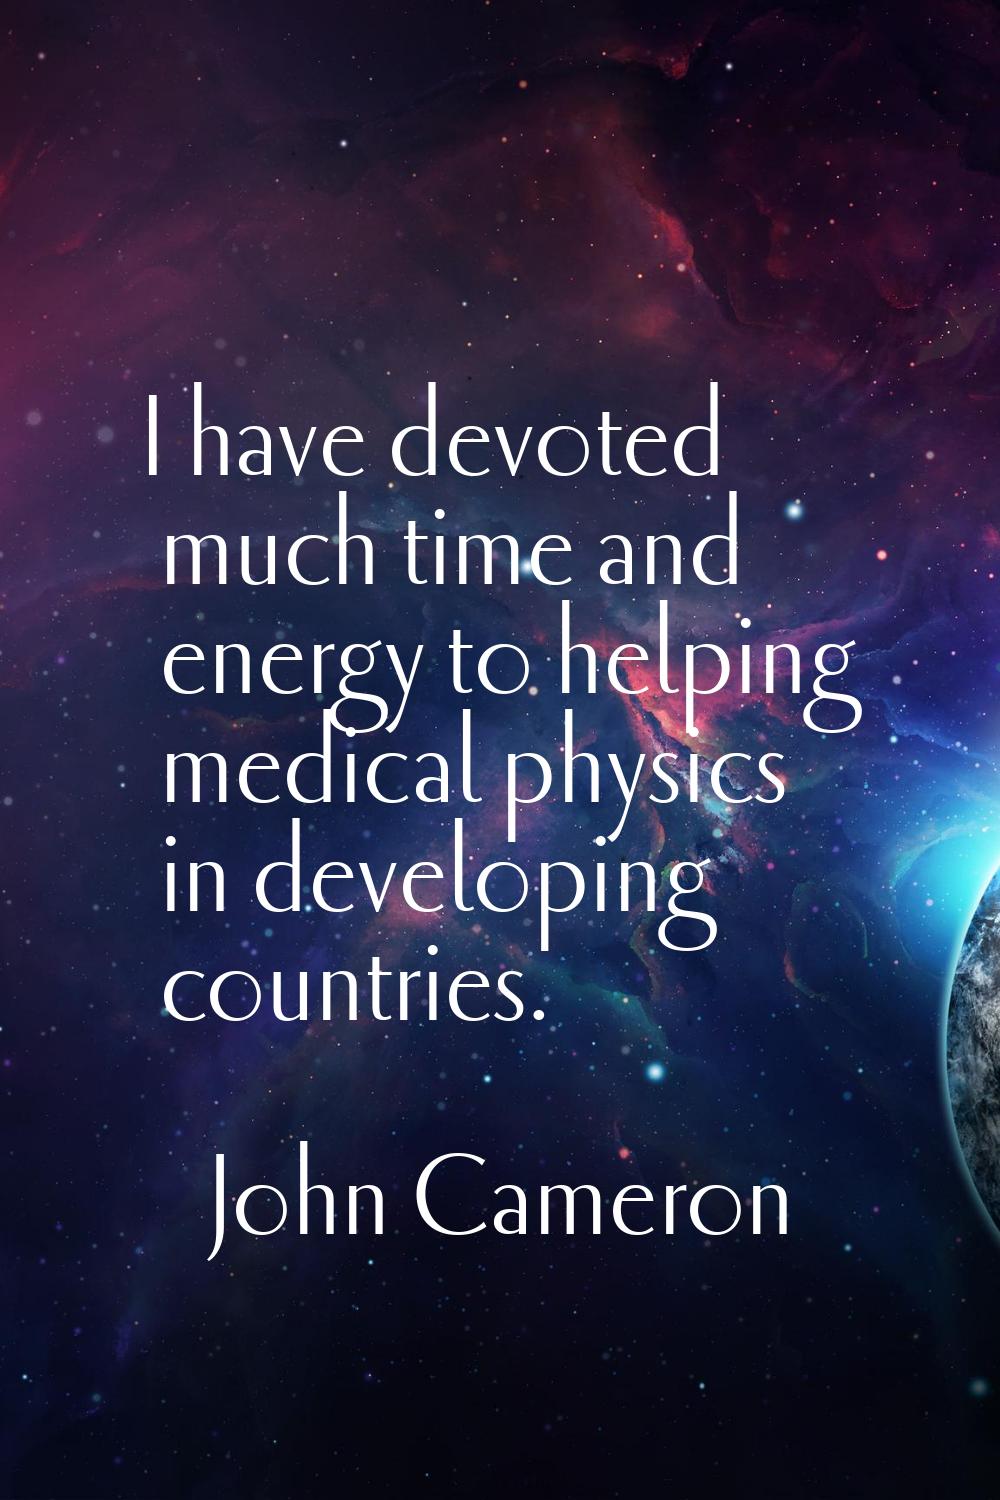 I have devoted much time and energy to helping medical physics in developing countries.